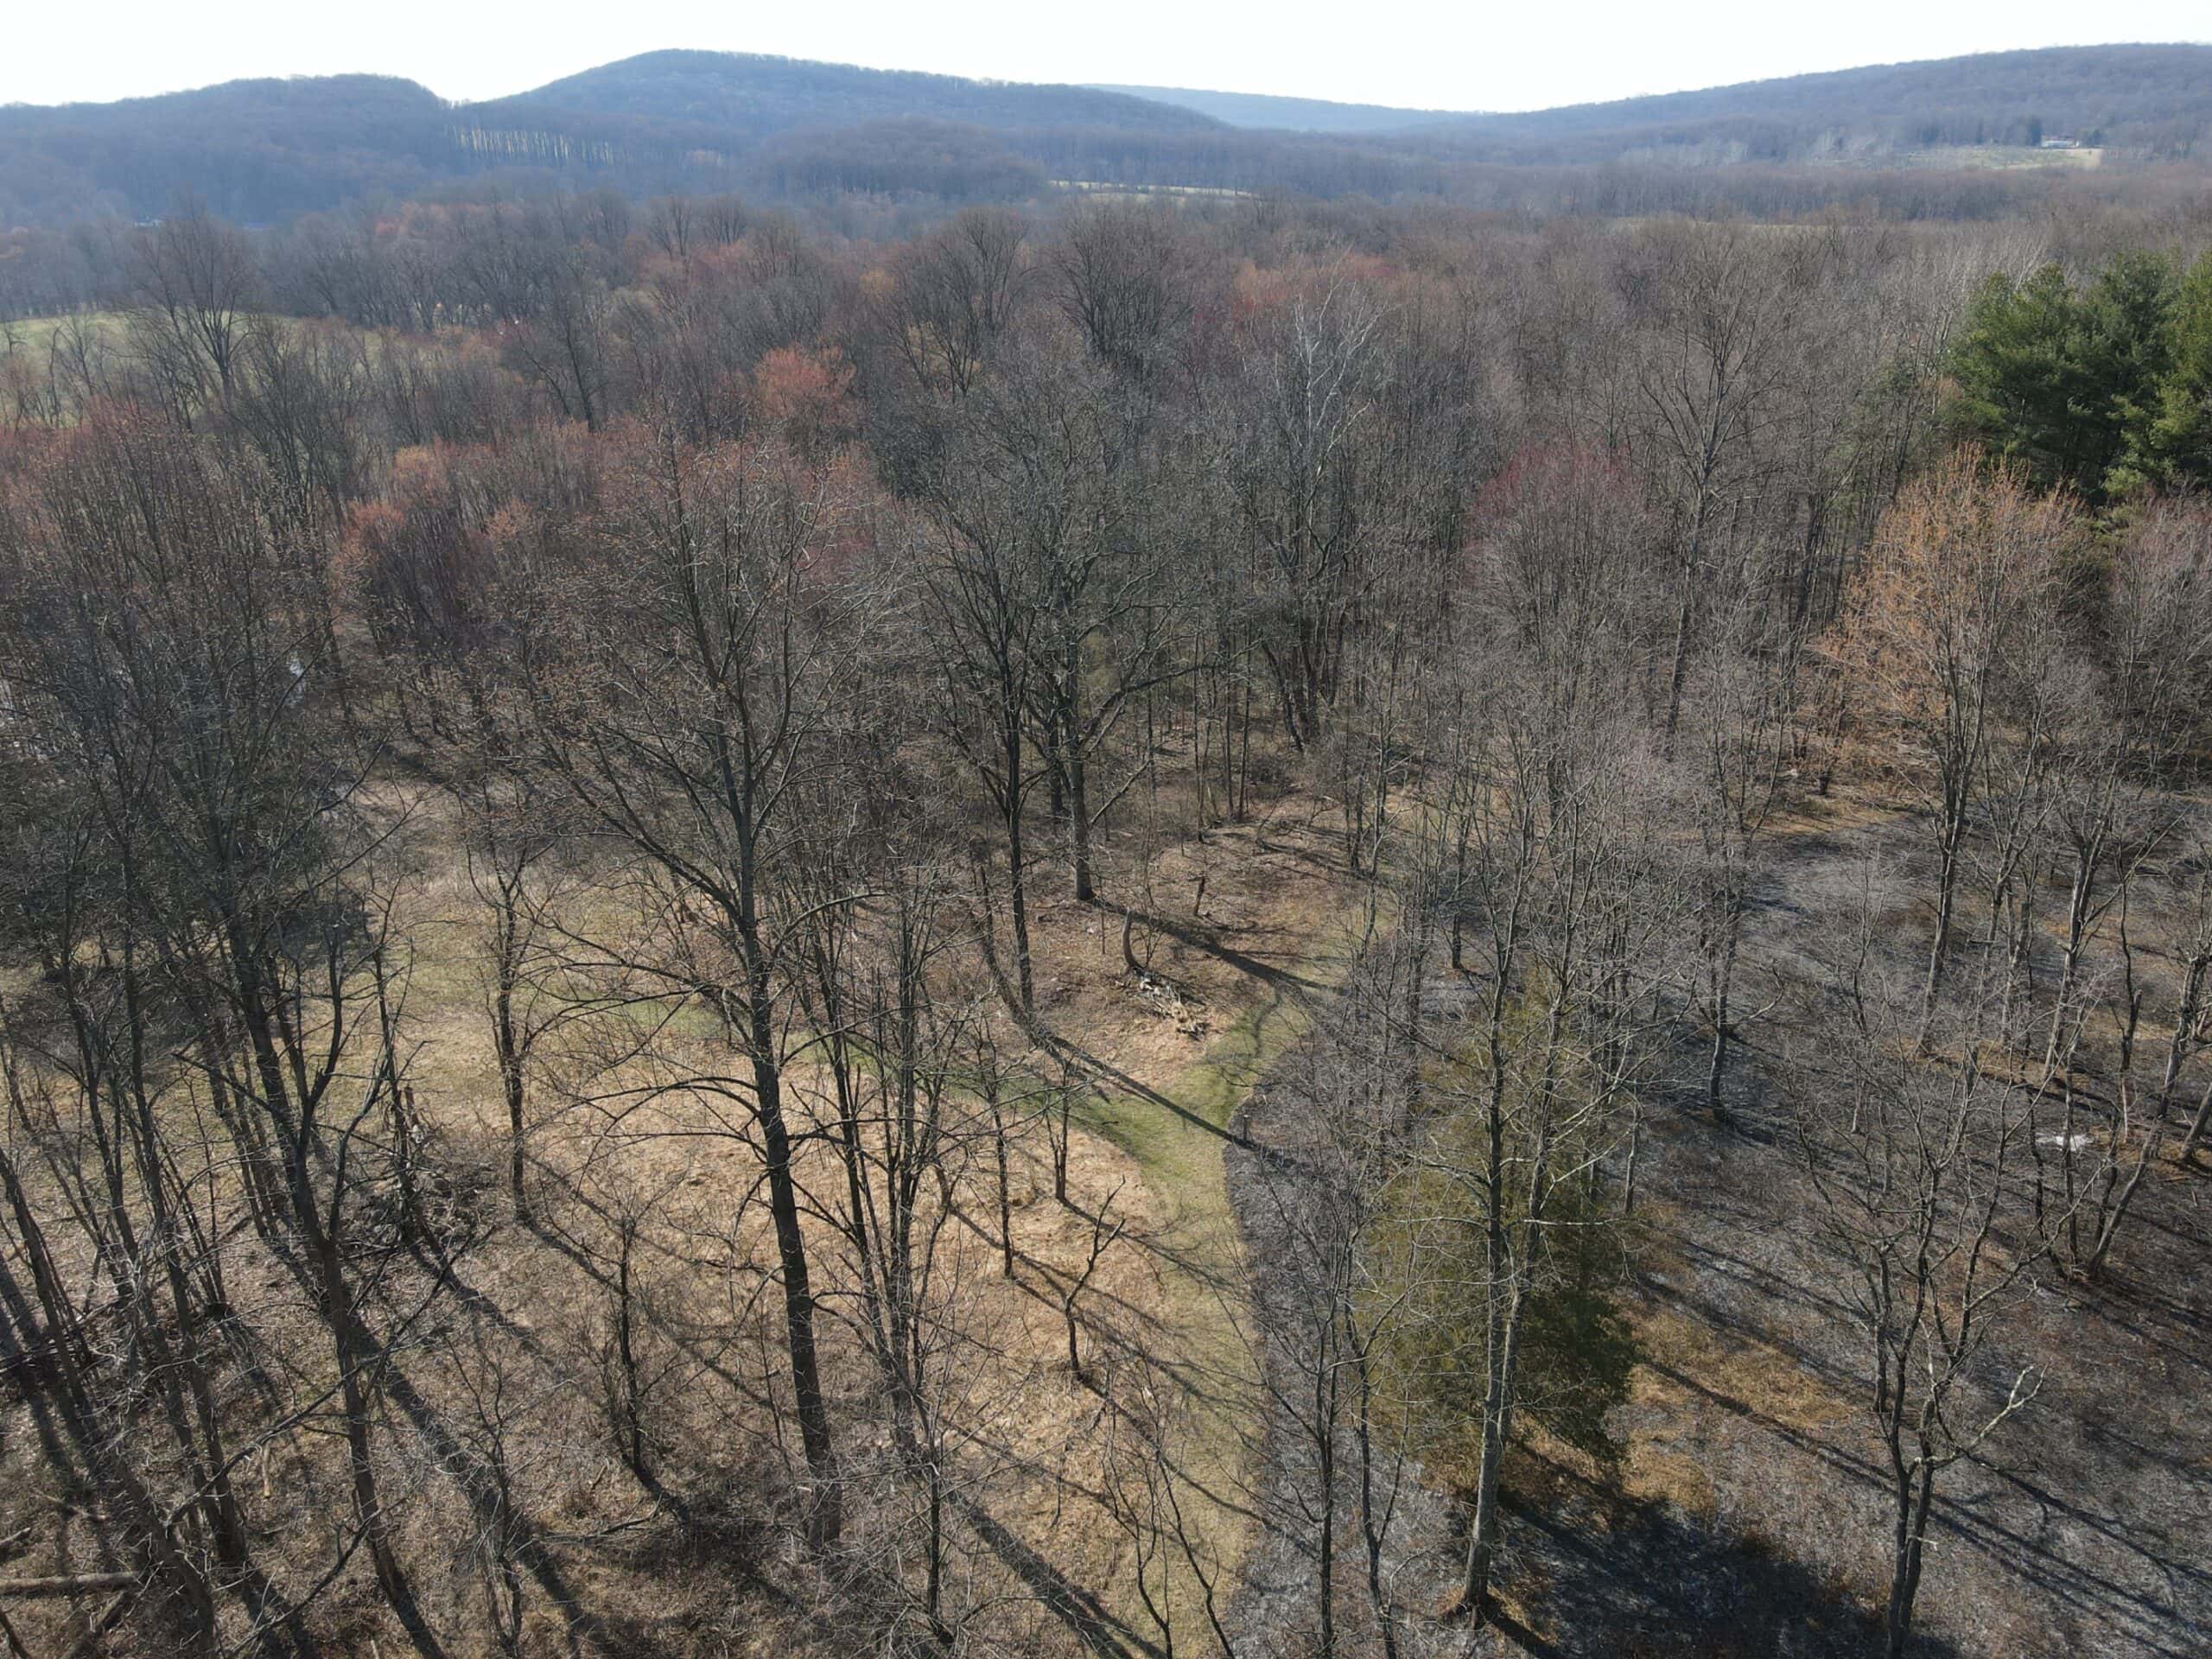 An aerial photo of a woodland opening managed with prescribed fire with hills in the background